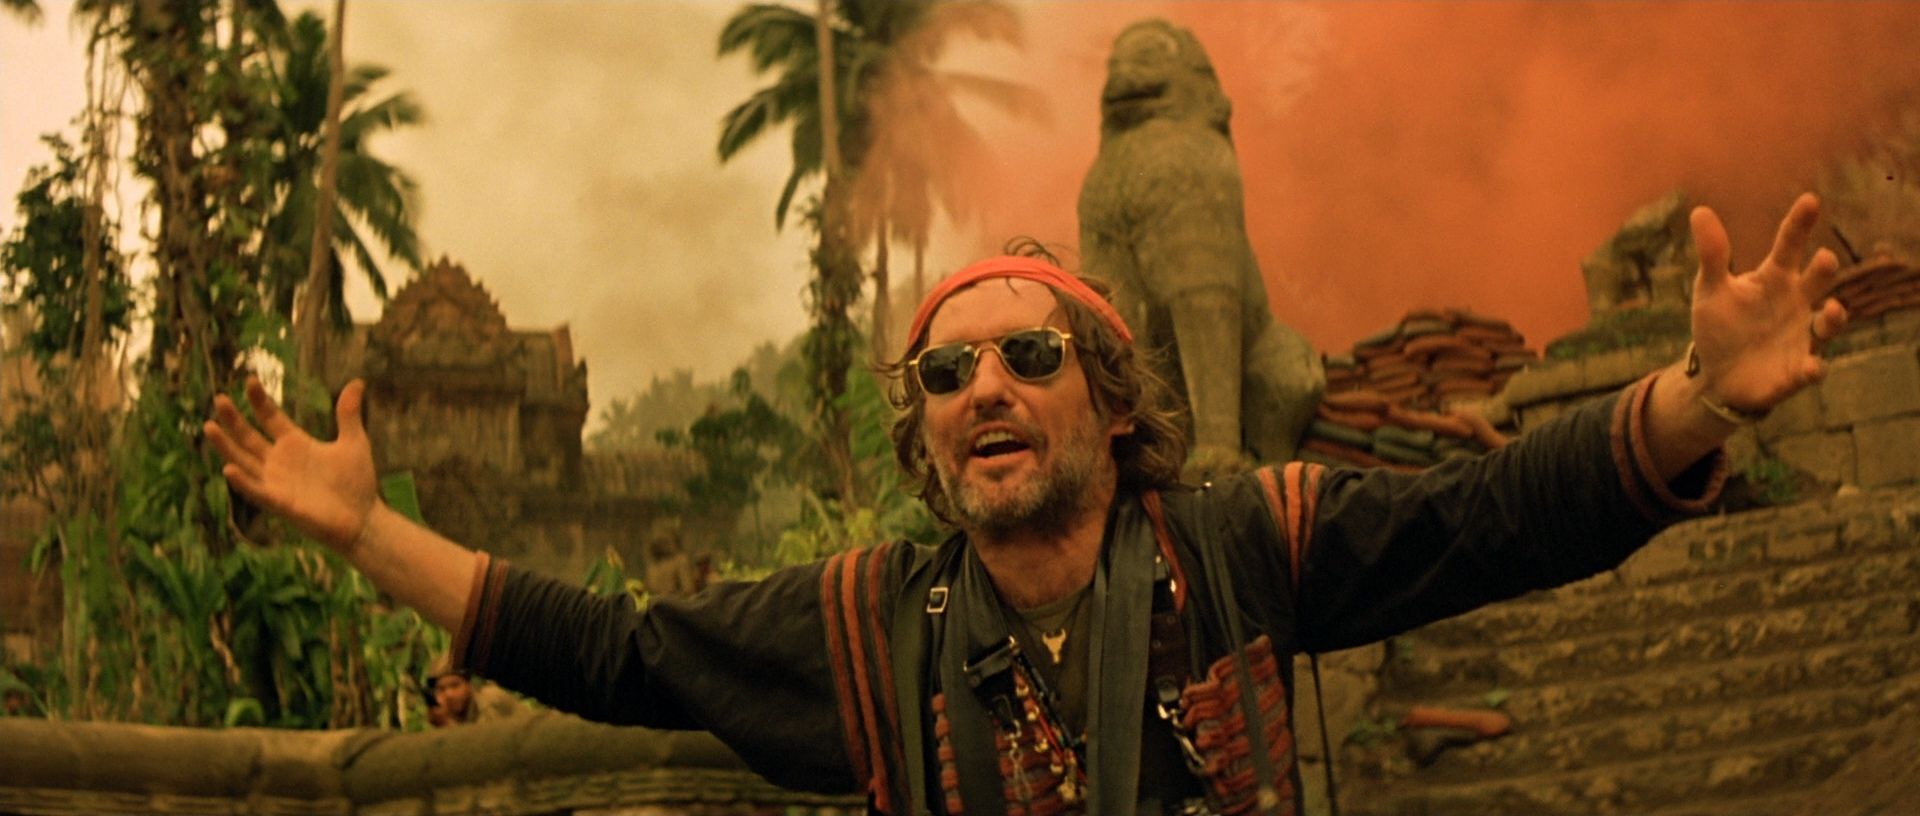 Apocalypse Now Movie HD Wallpaper Movies Backgrounds